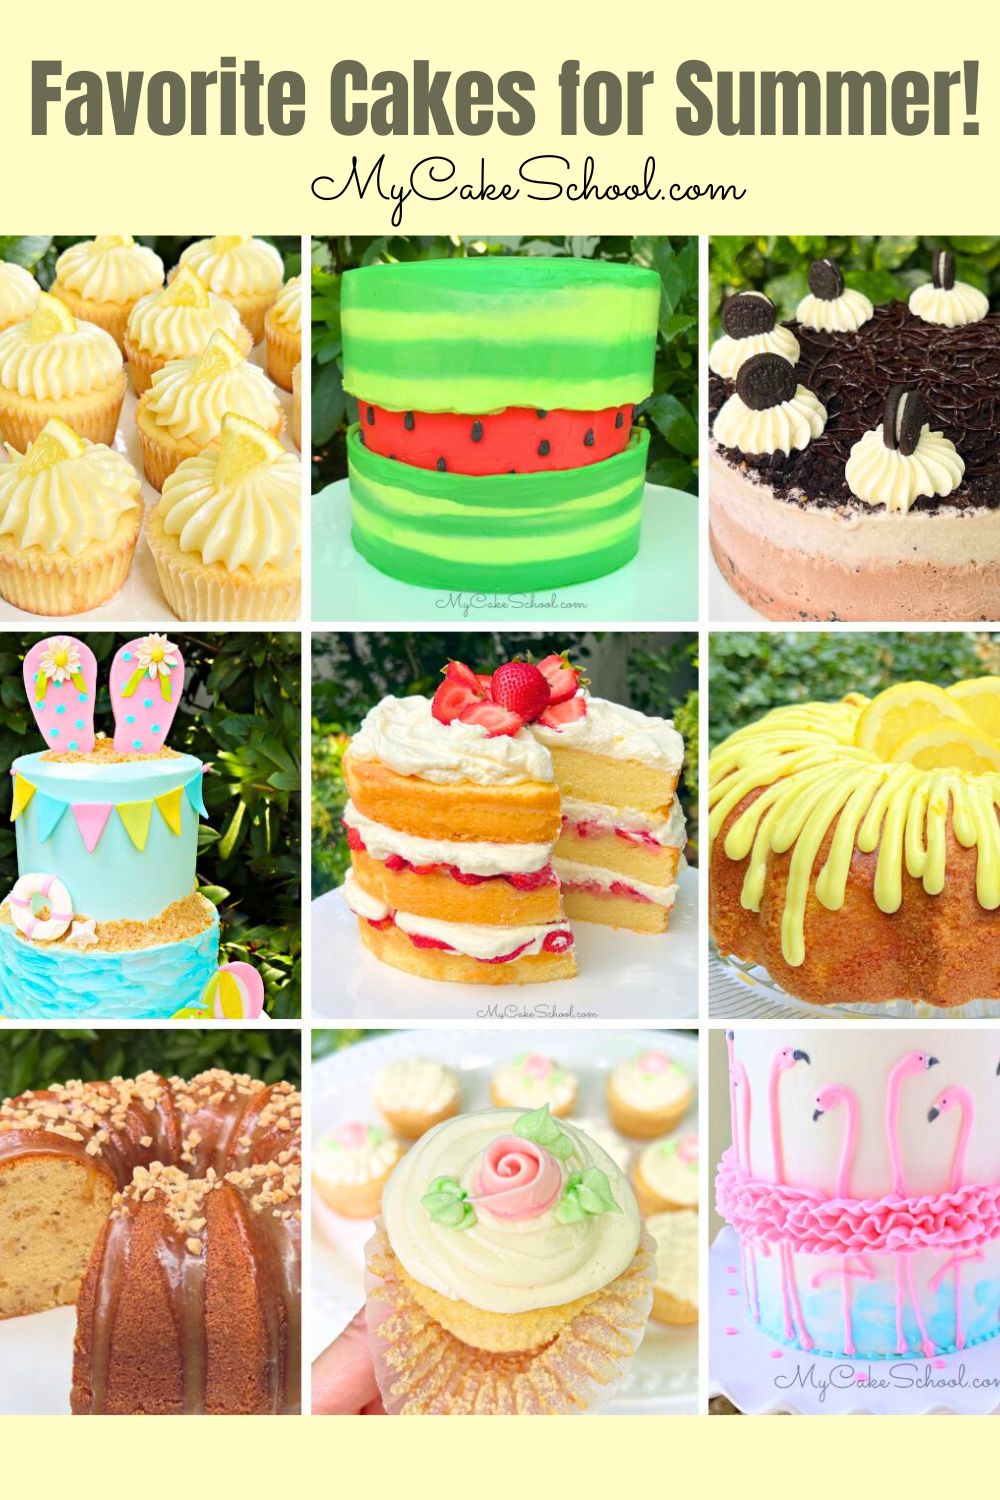 Collage of Favorite Summer Cakes, from lemon cupcakes to beach themed cakes and more.